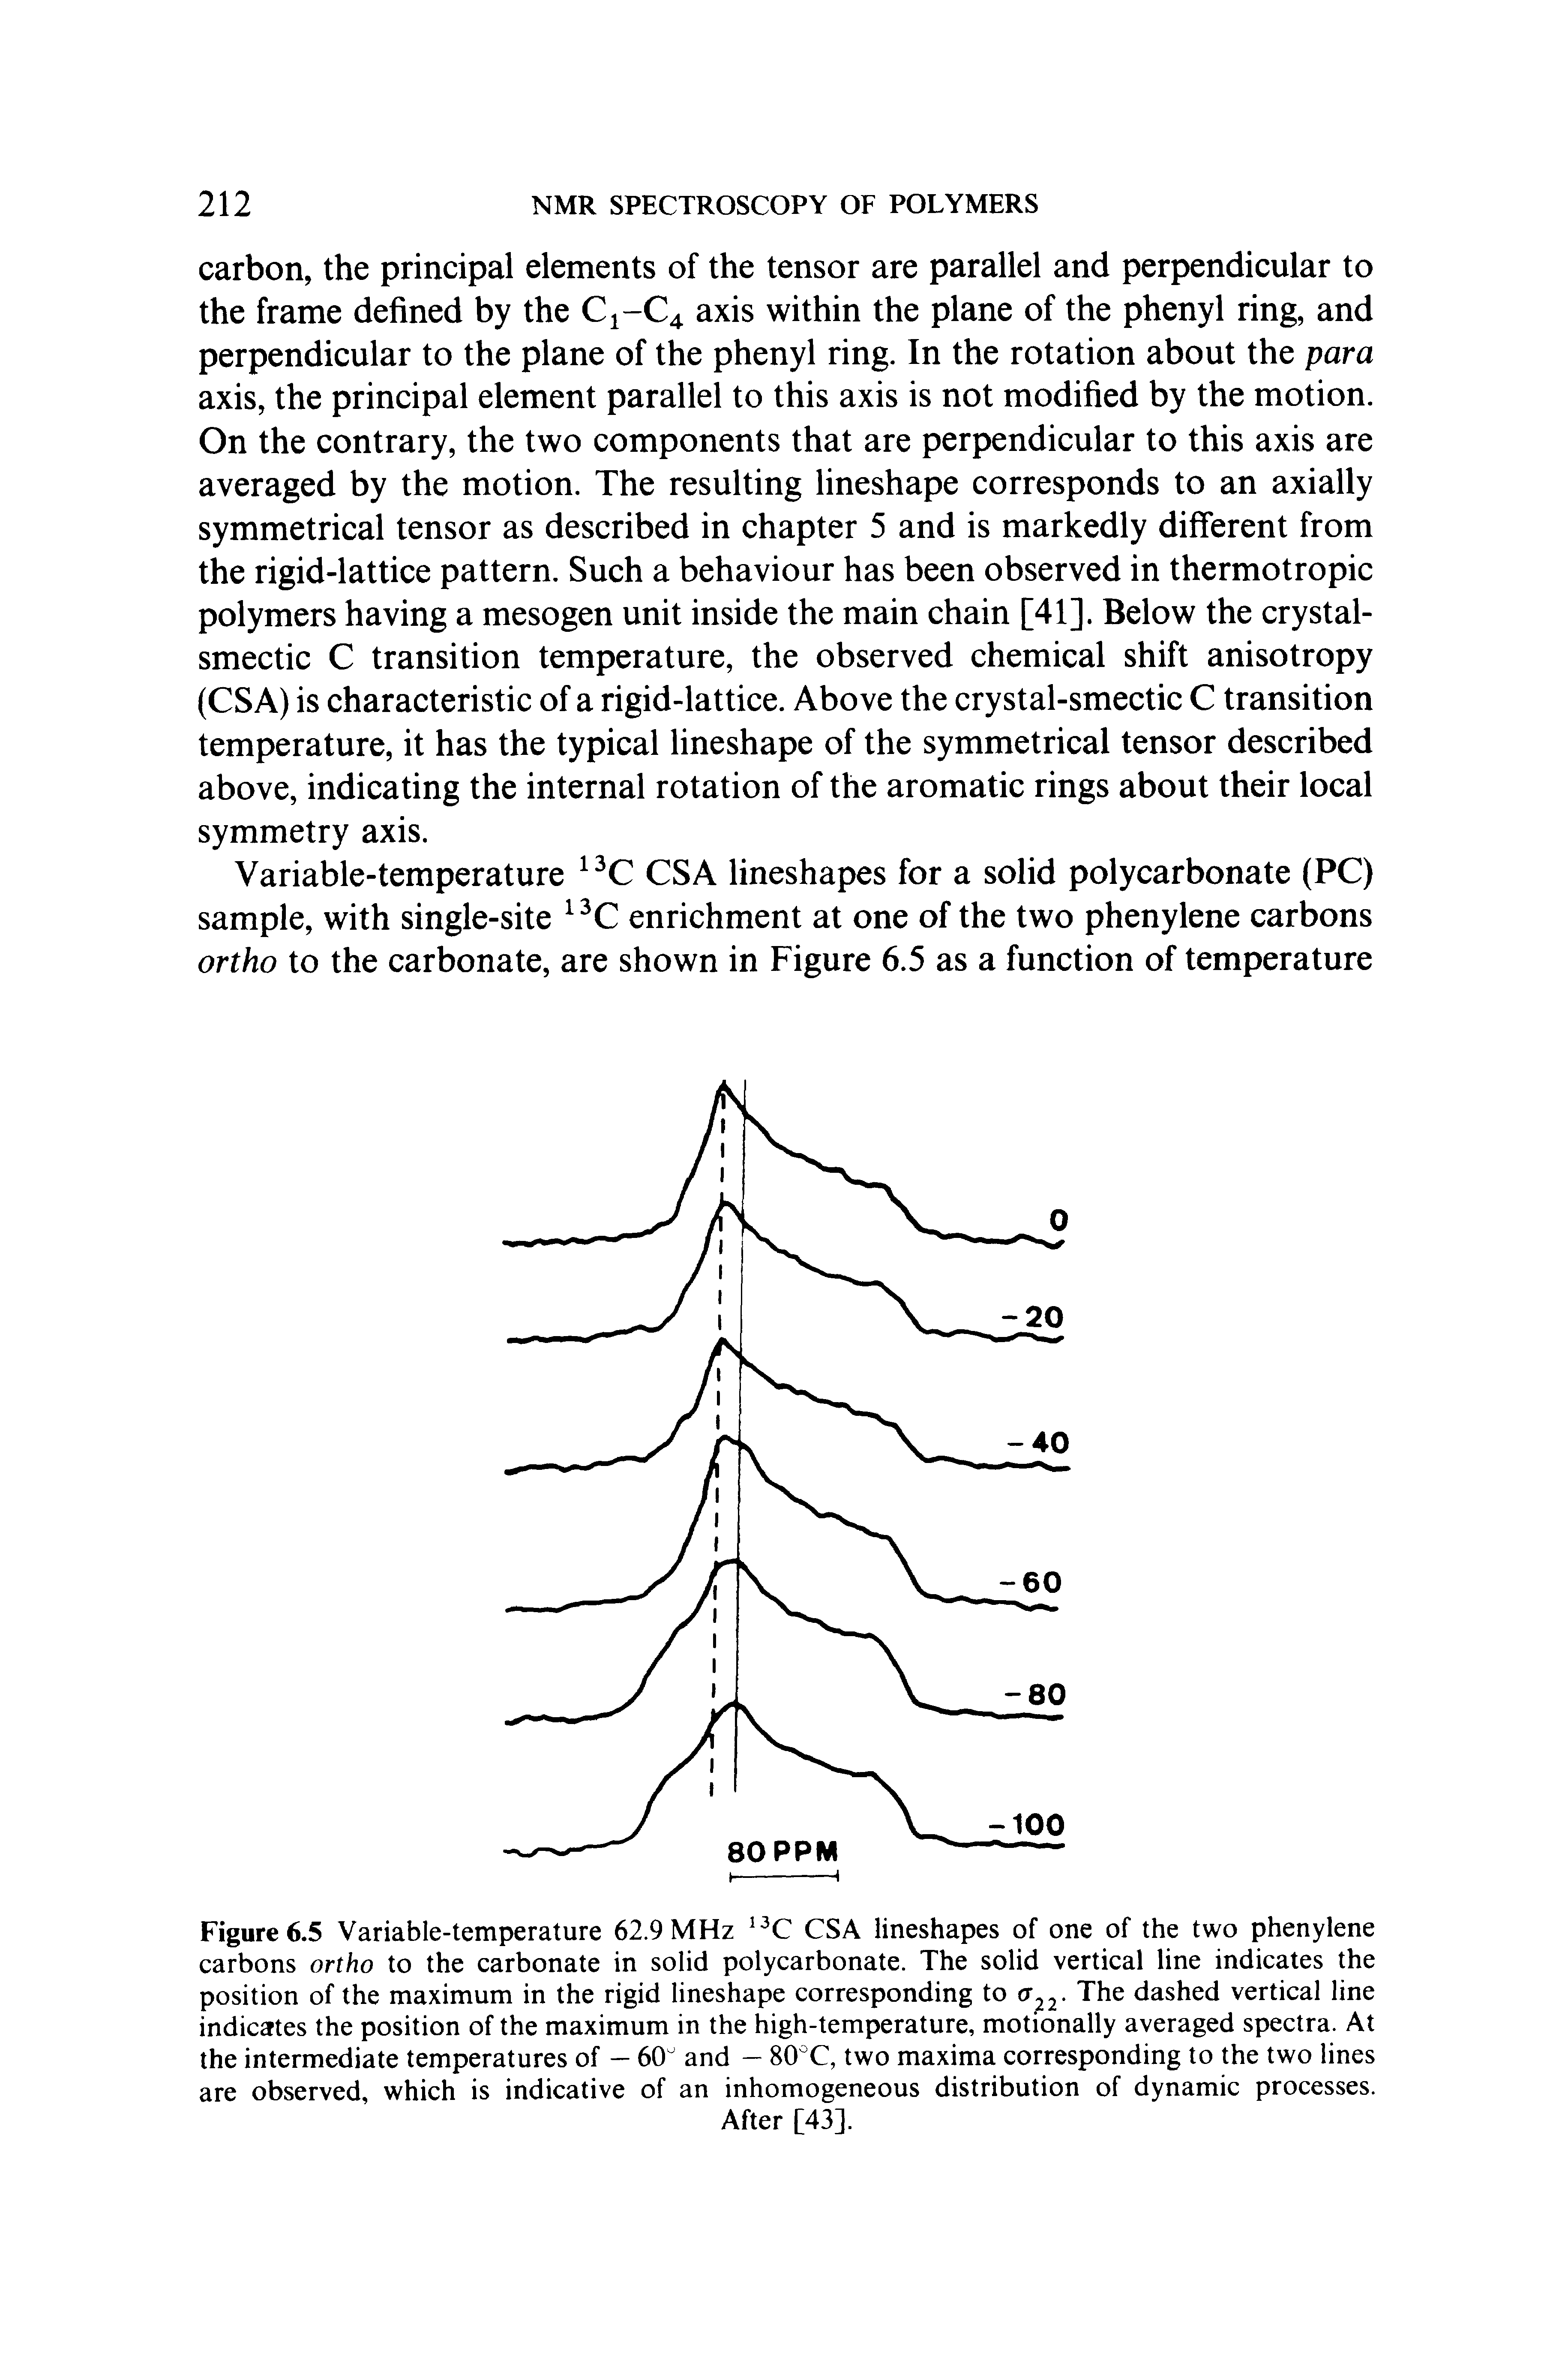 Figure 6.5 Variable-temperature 62.9 MHz CSA lineshapes of one of the two phenylene carbons ortho to the carbonate in solid polycarbonate. The solid vertical line indicates the position of the maximum in the rigid lineshape corresponding to The dashed vertical line indicates the position of the maximum in the high-temperature, motionally averaged spectra. At the intermediate temperatures of — 60" and — 80"C, two maxima corresponding to the two lines are observed, which is indicative of an inhomogeneous distribution of dynamic processes.